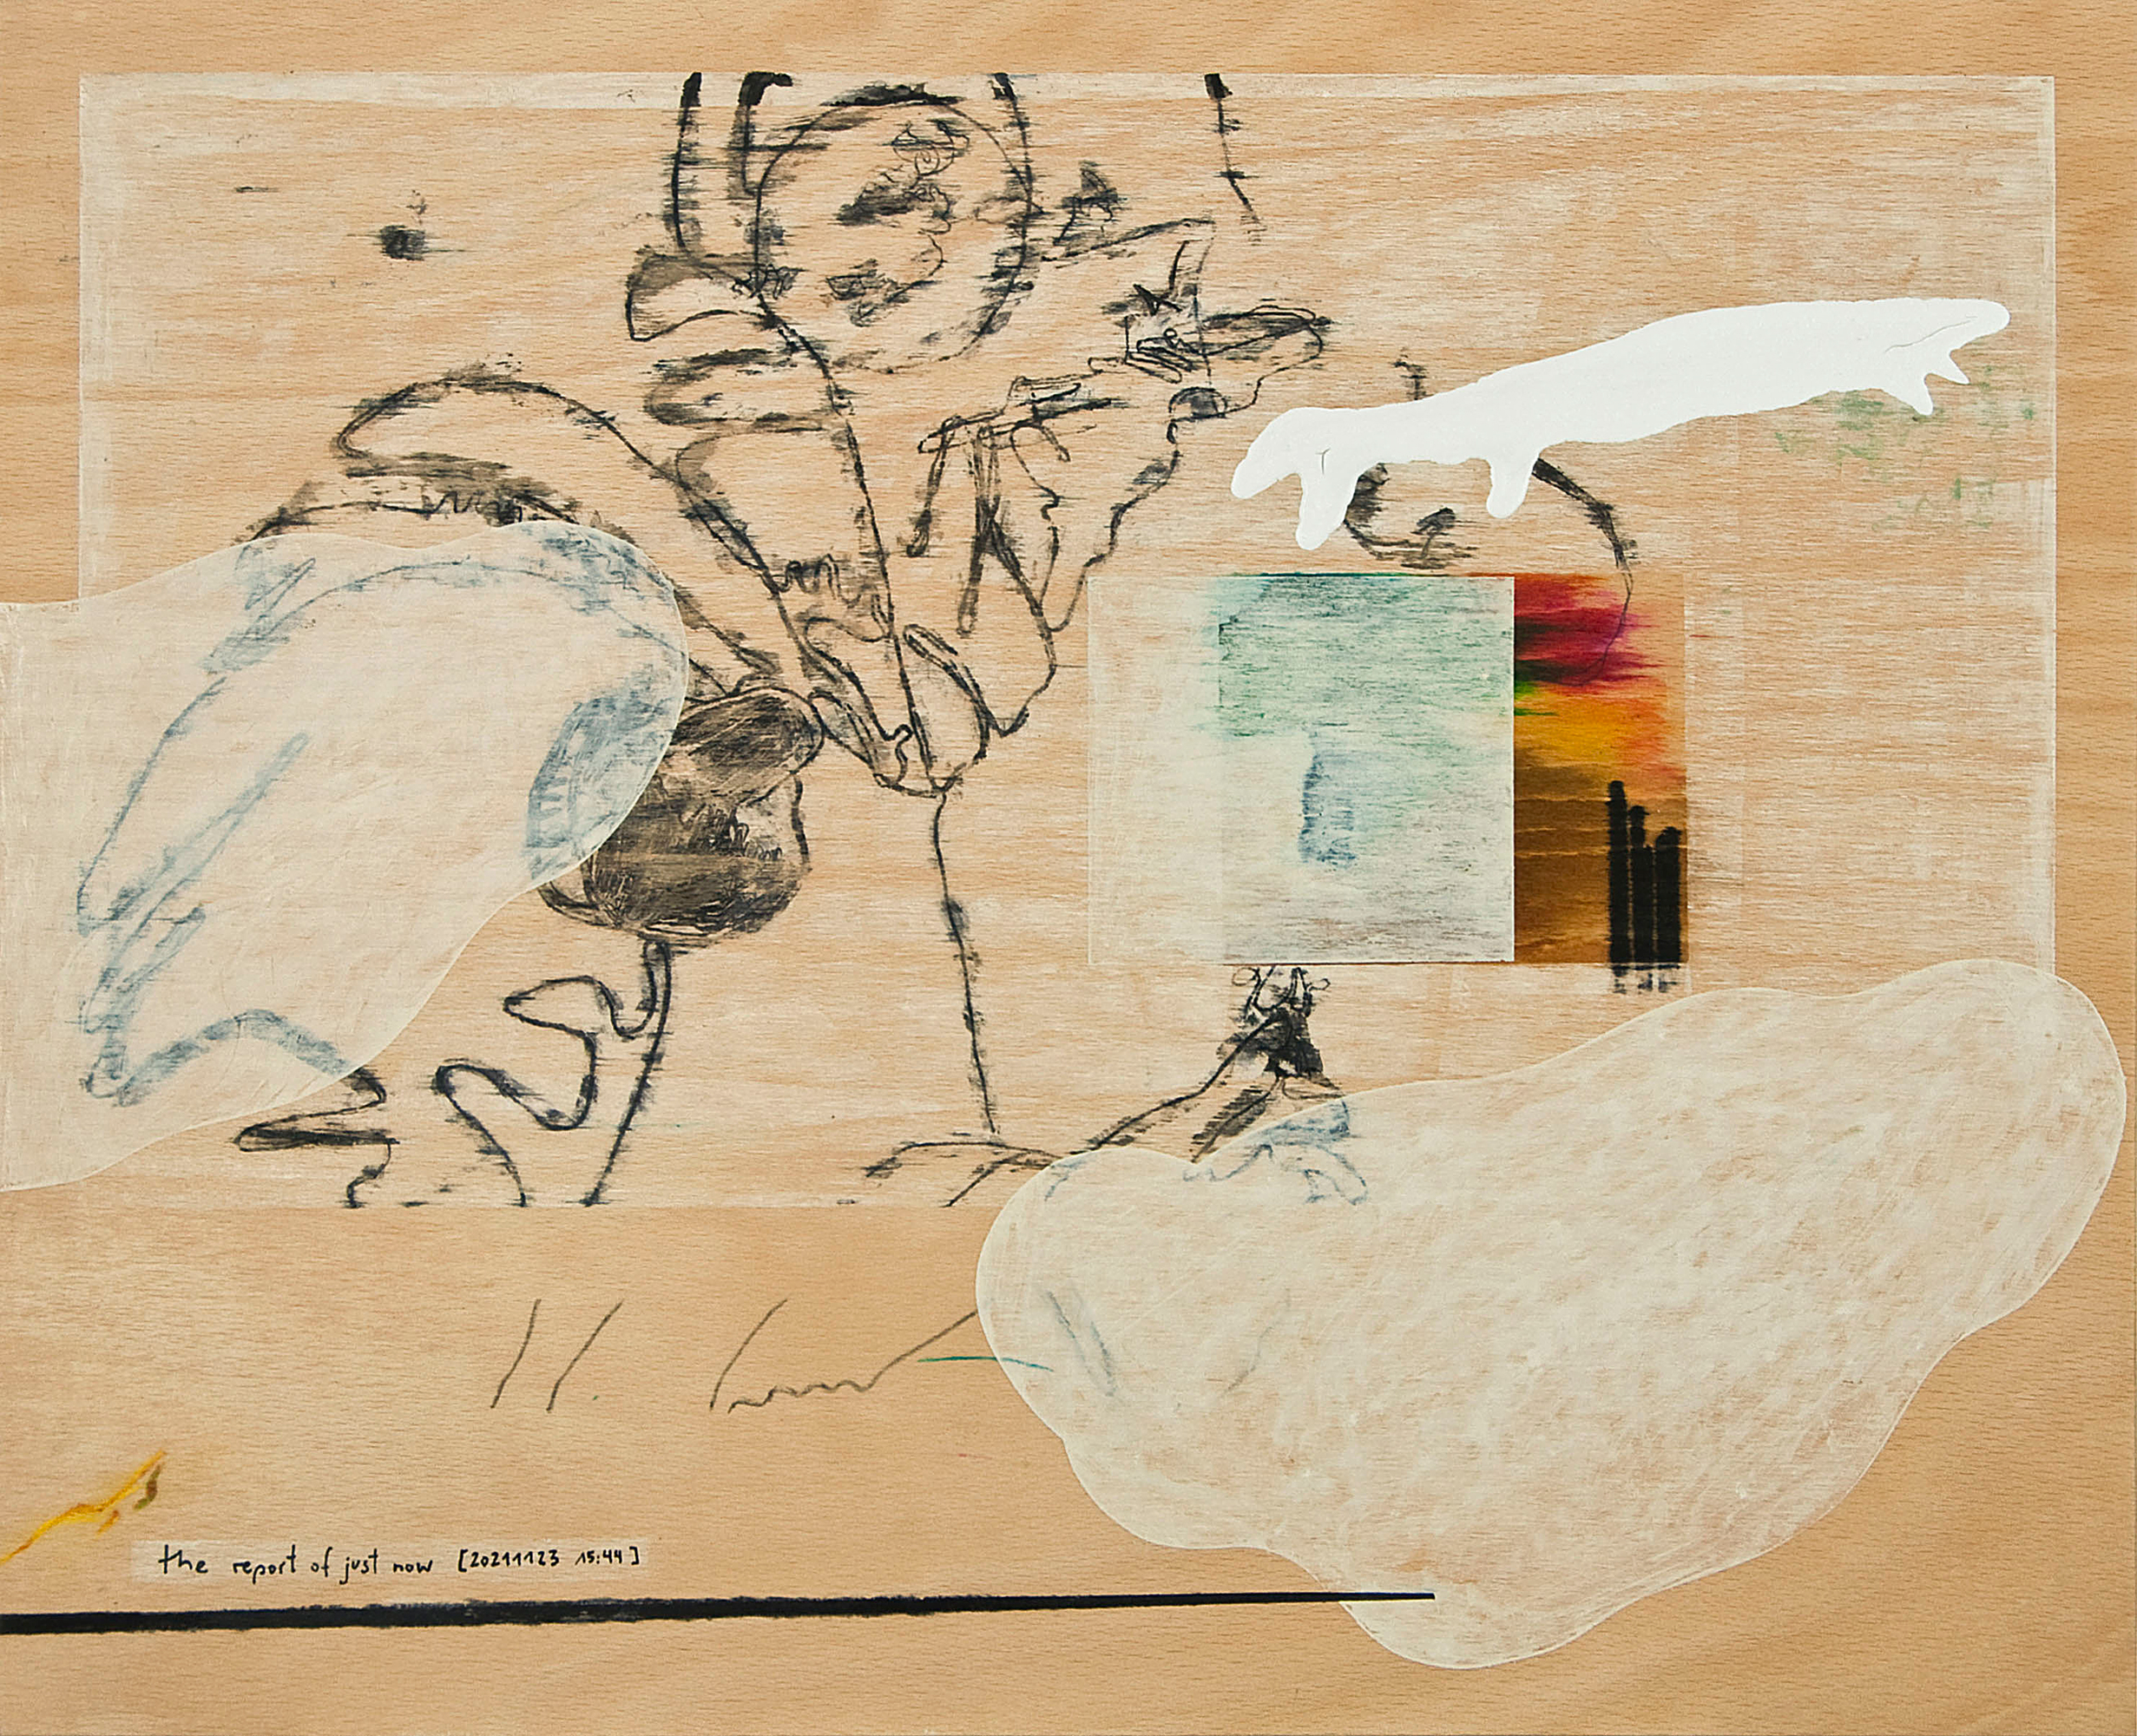 Wolfgang Kschwendt: "The report of just now", mixed media on wood, 50 x 40 x 3 cm, 2022